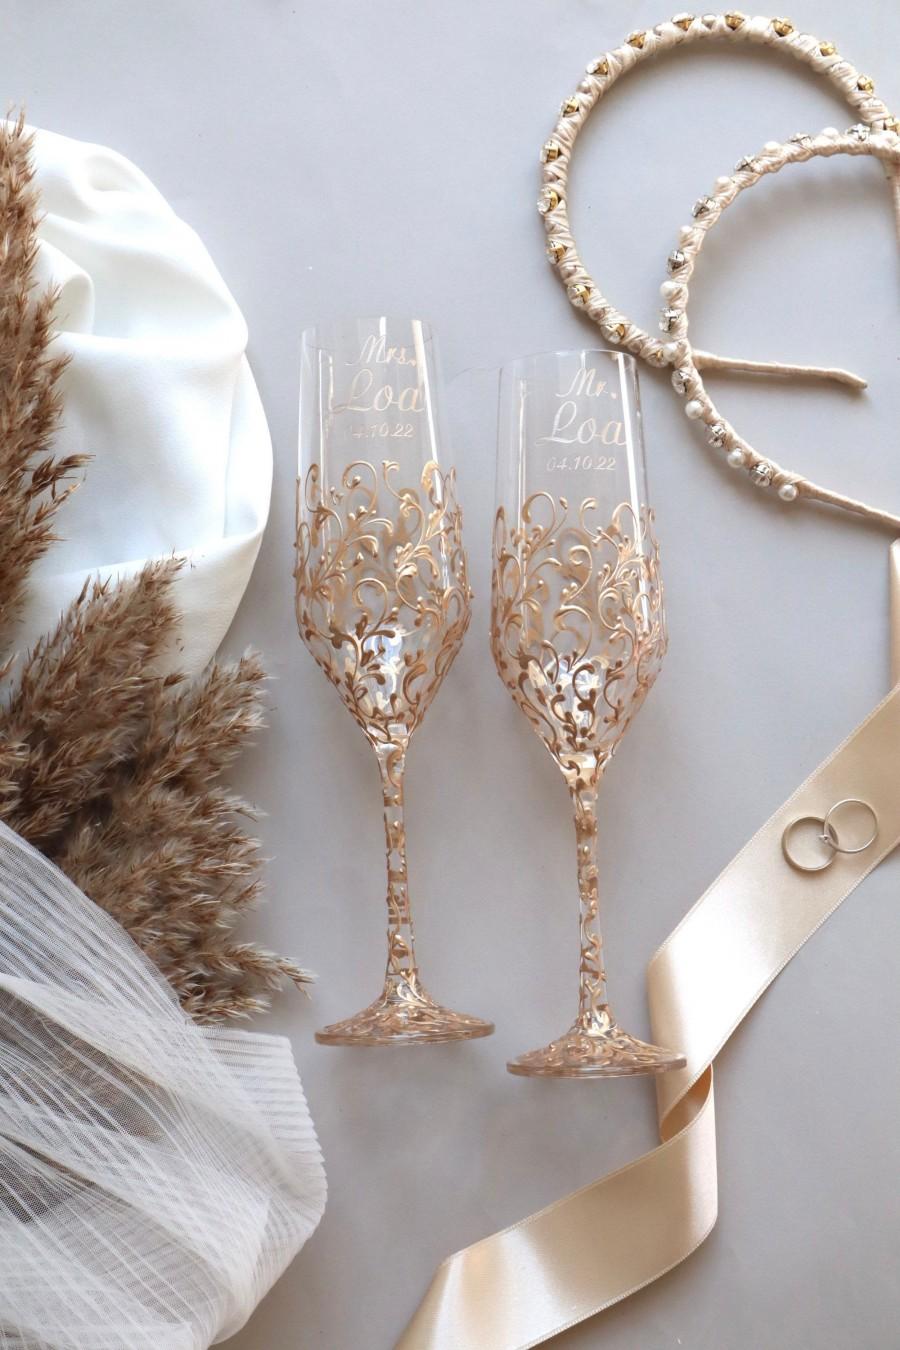 wedding decorations personalized wedding glasses Toasting flutes Personalized gift flutes set of2 champagne flutes bride and groom